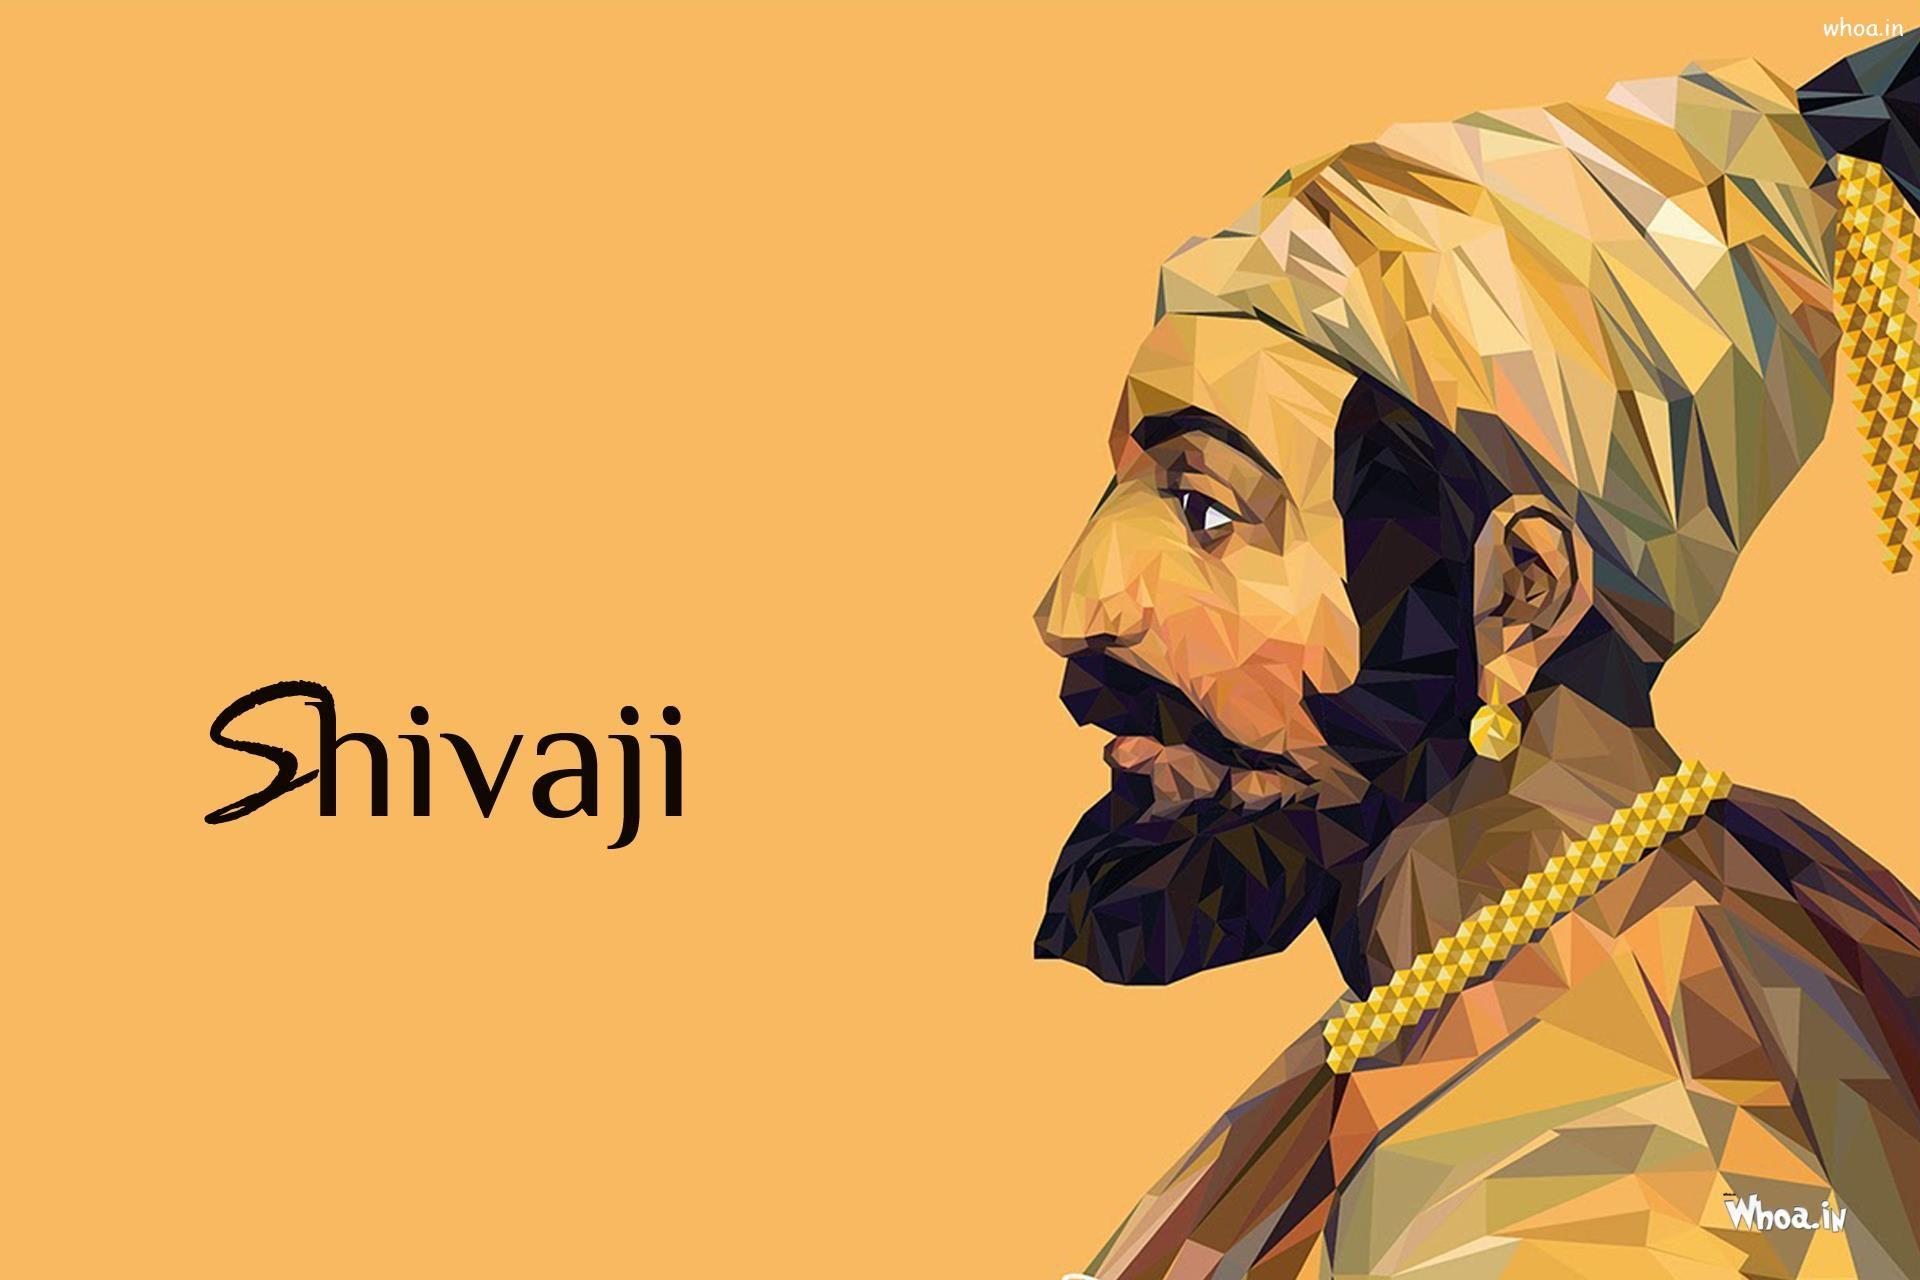 Shivaji Maharaj Hd Wallpapers Wallpaper Cave Add animations to your images in minutes. shivaji maharaj hd wallpapers